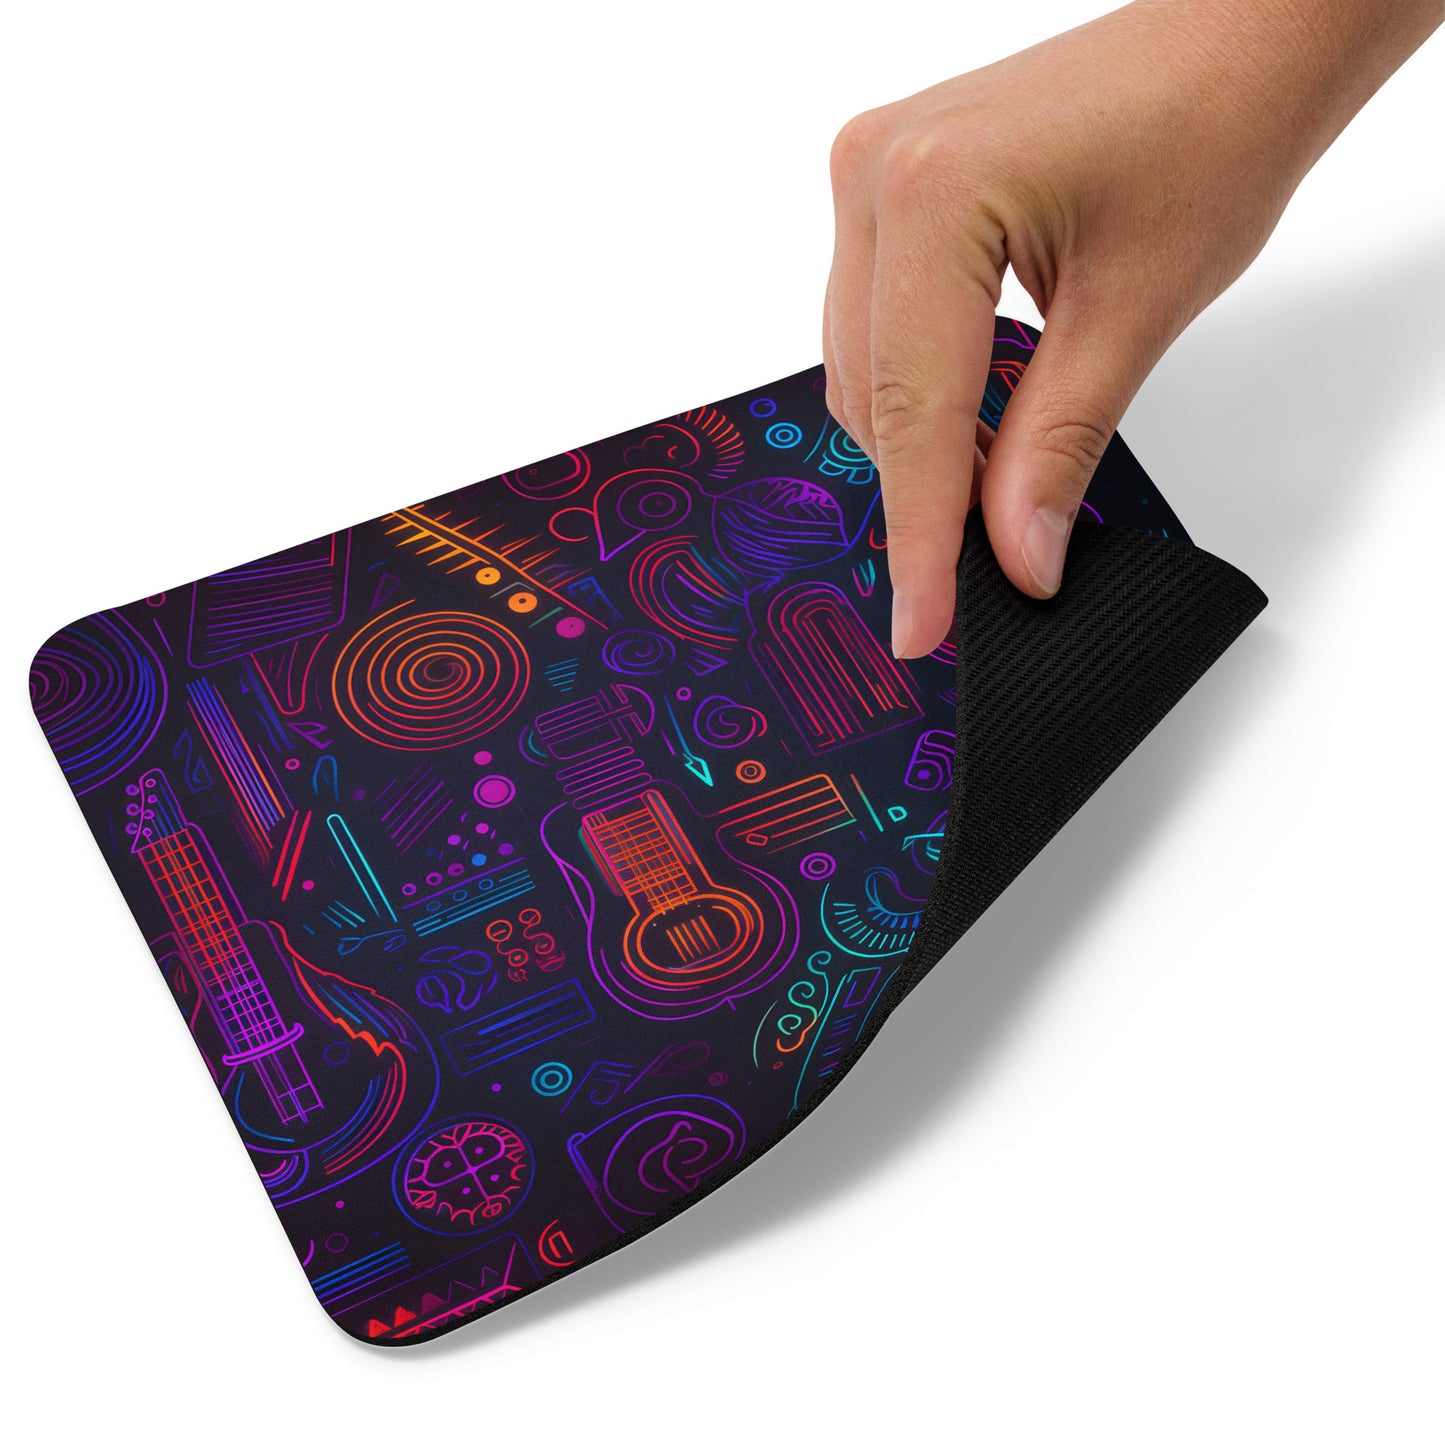 Mouse Pad Neon 3